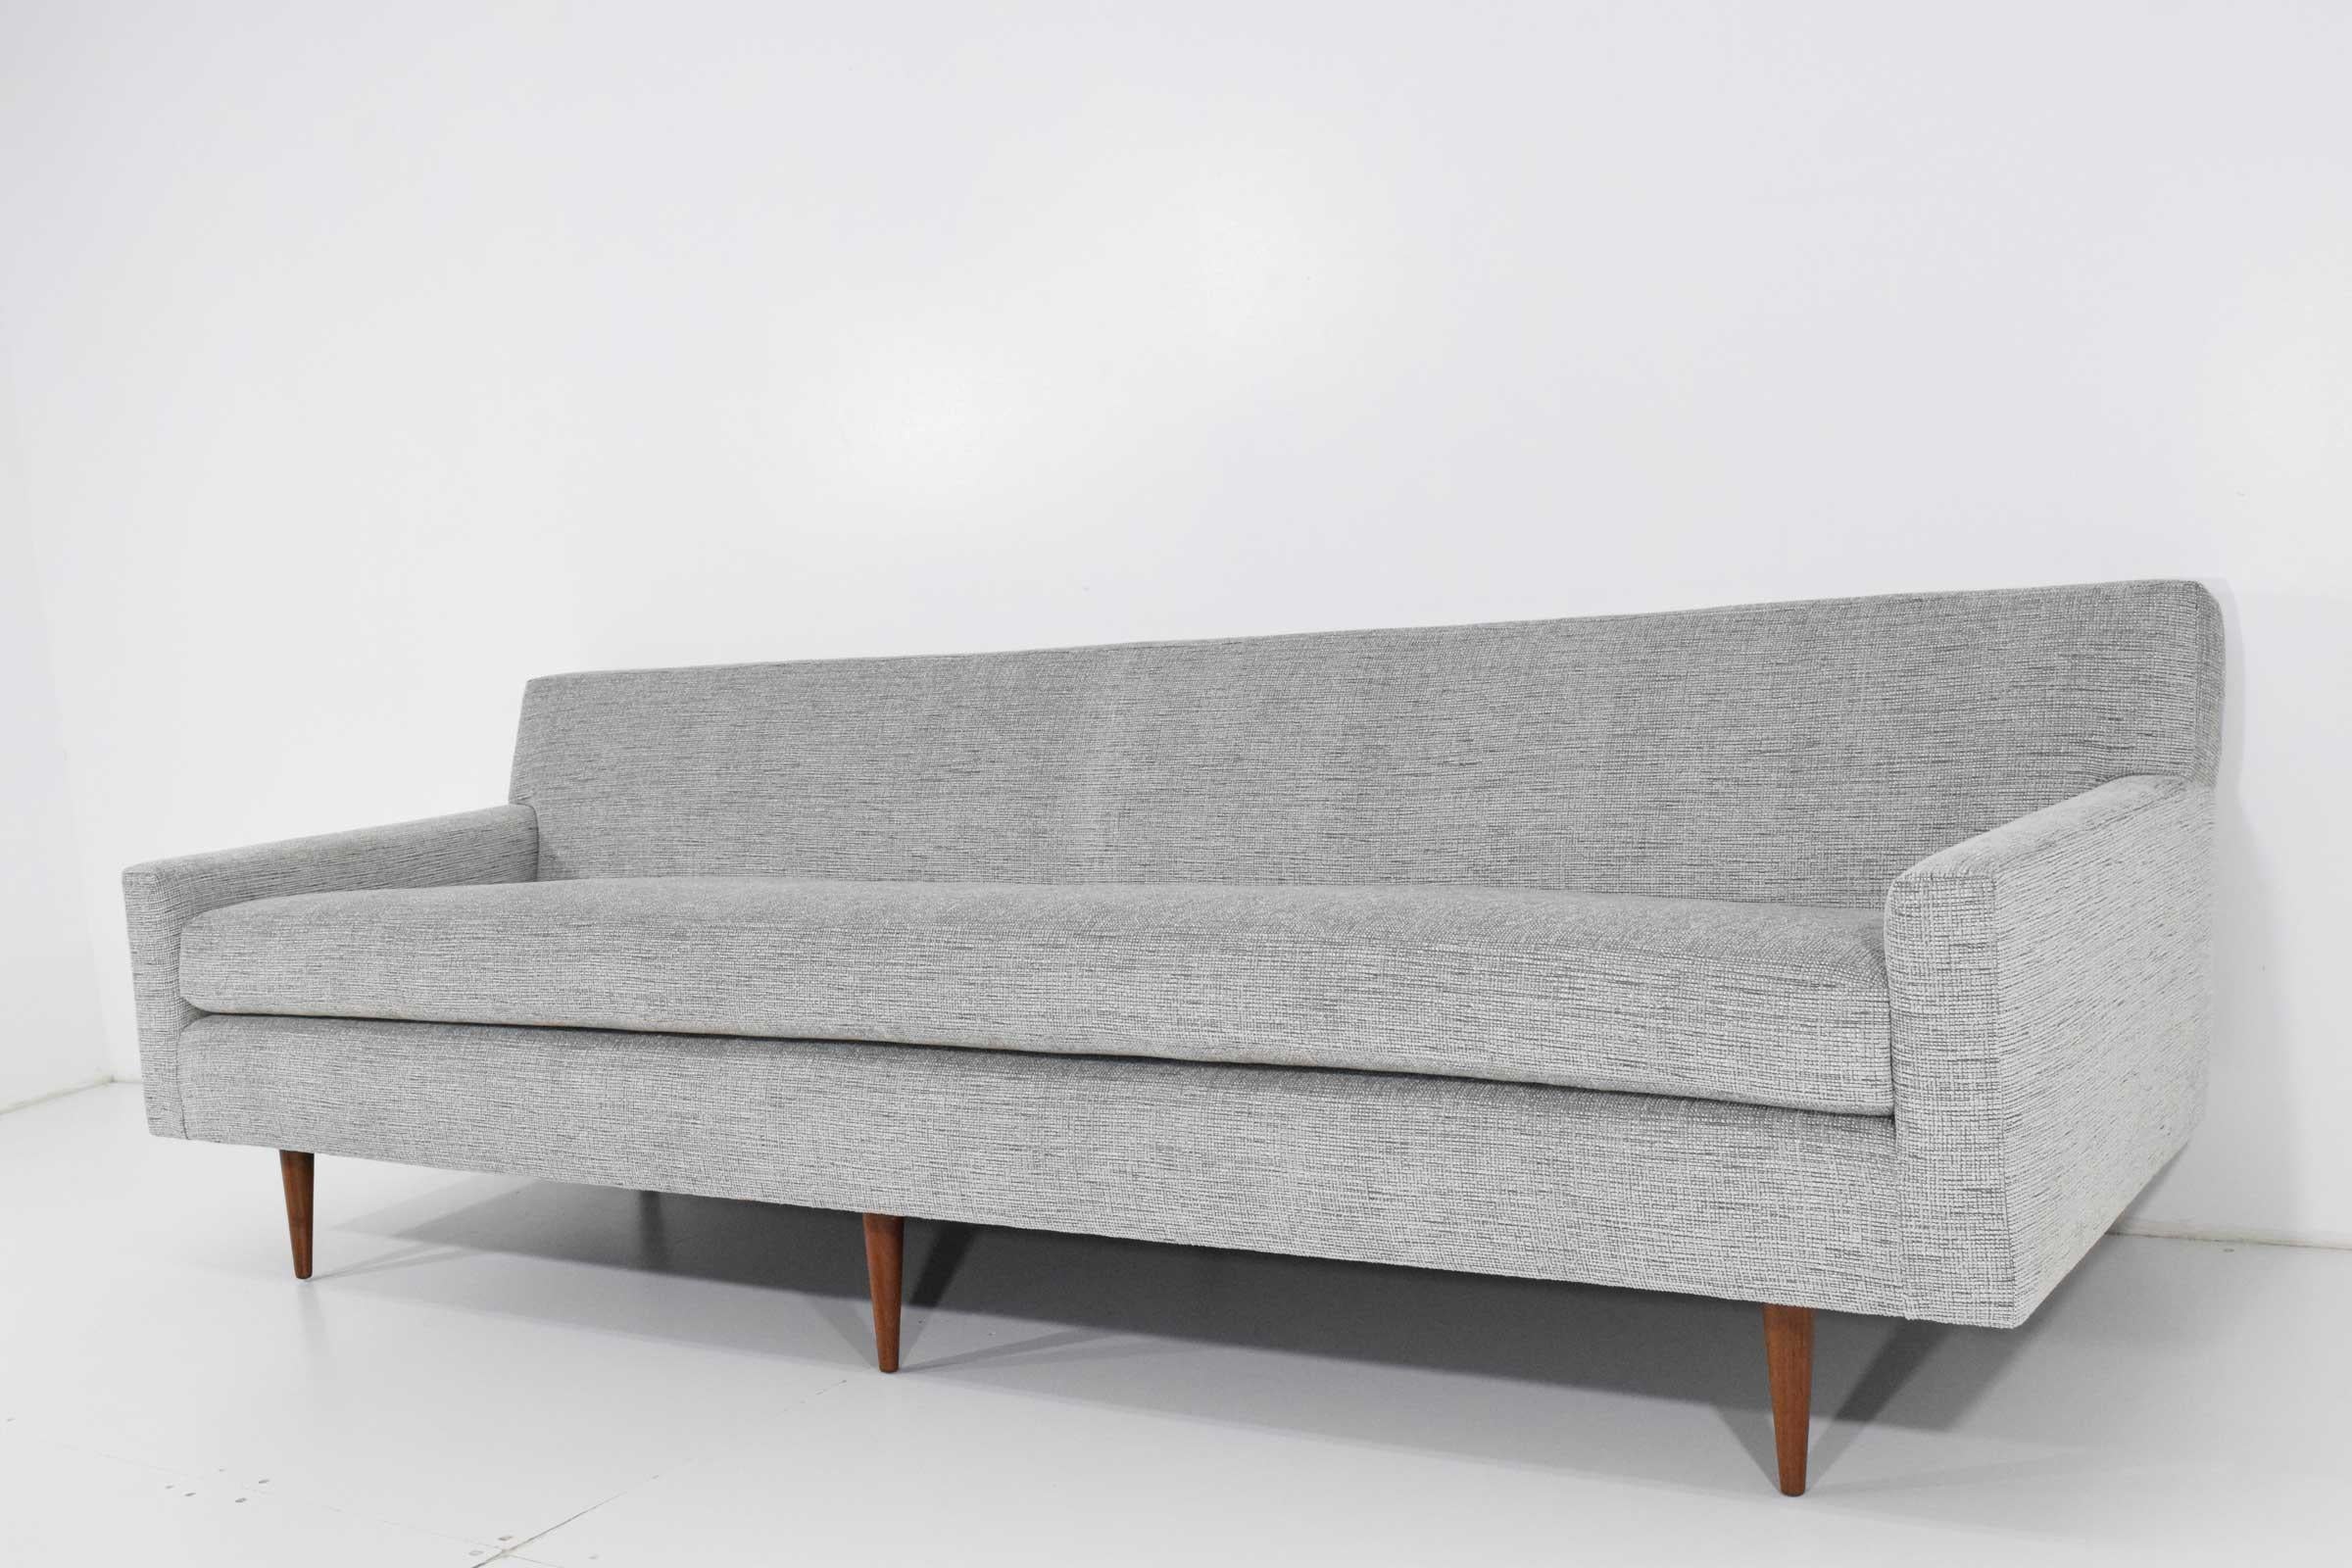 We have reupholstered this gorgeous midcentury sofa in a Mokum fabric from Holly Hunt. New foam added. Chenille fabric has tones of silver, grey, blues and whites and has a great feel. Very versatile and works in multiple environments.